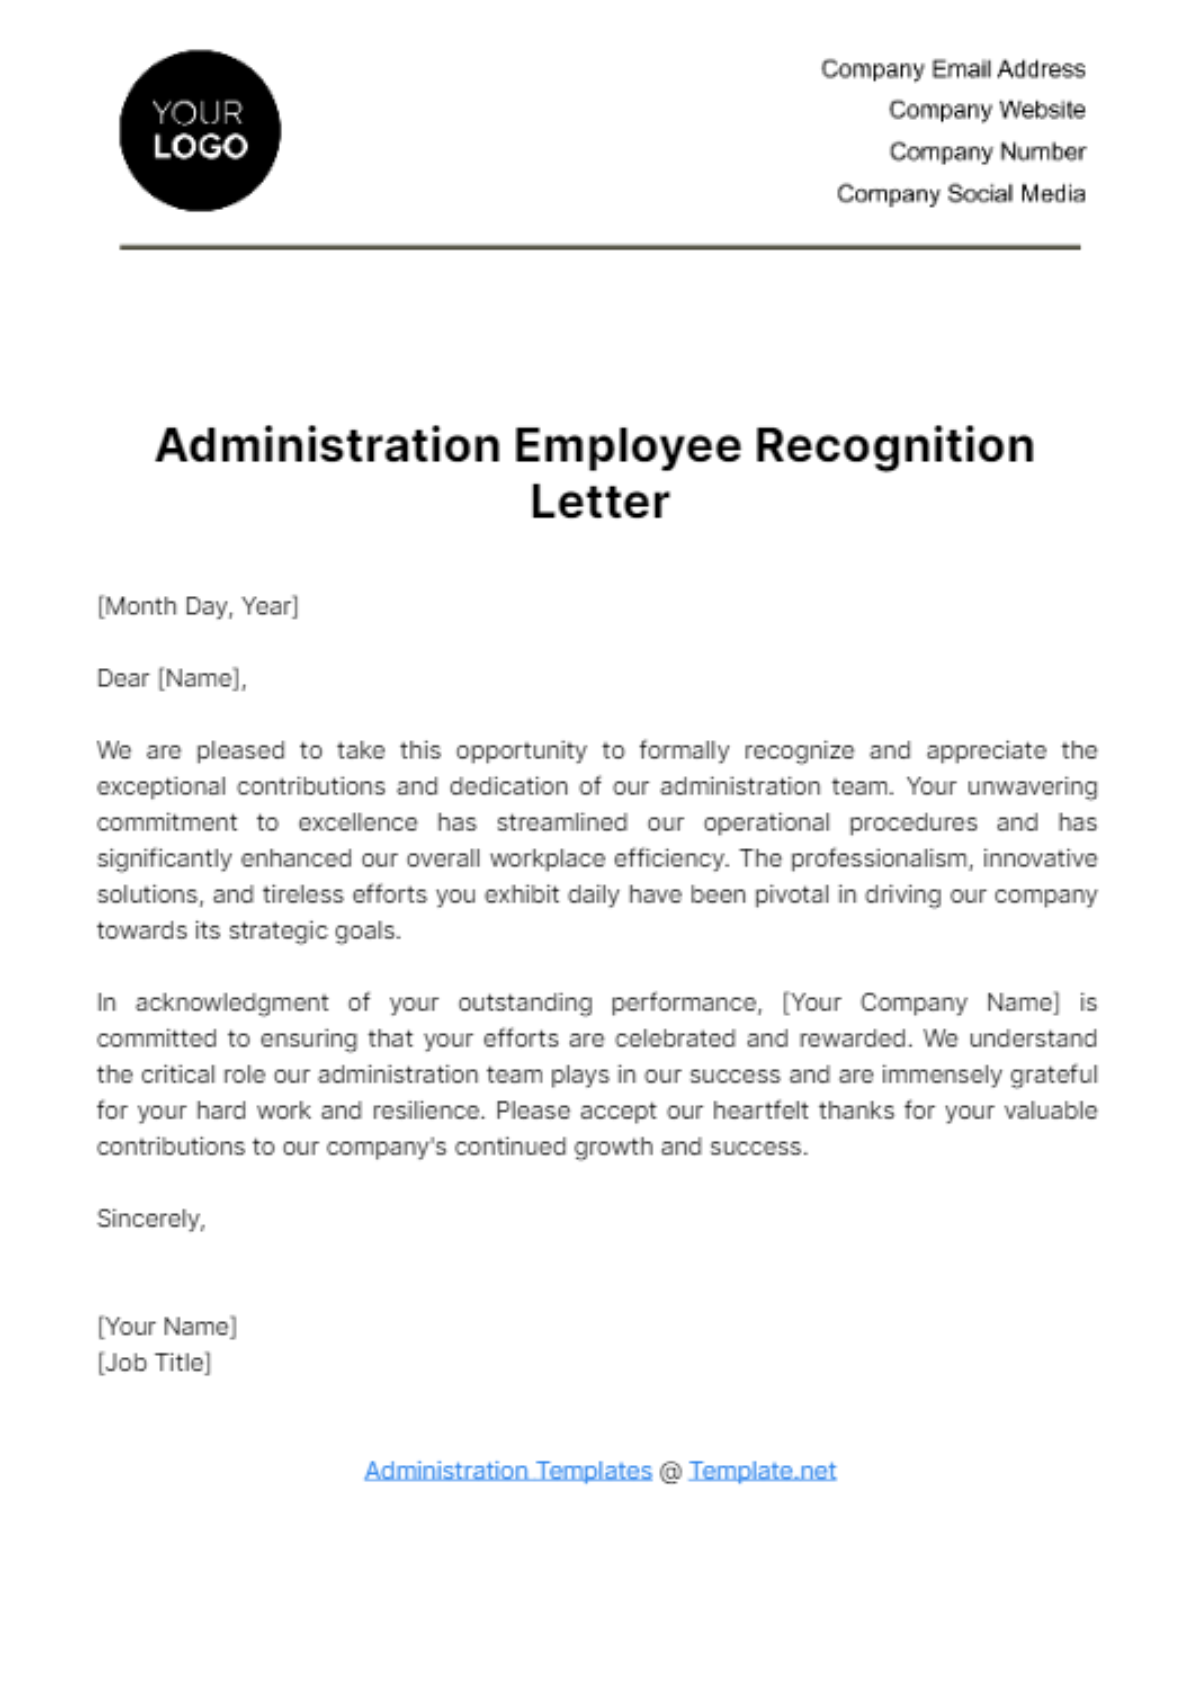 Free Administration Employee Recognition Letter Template